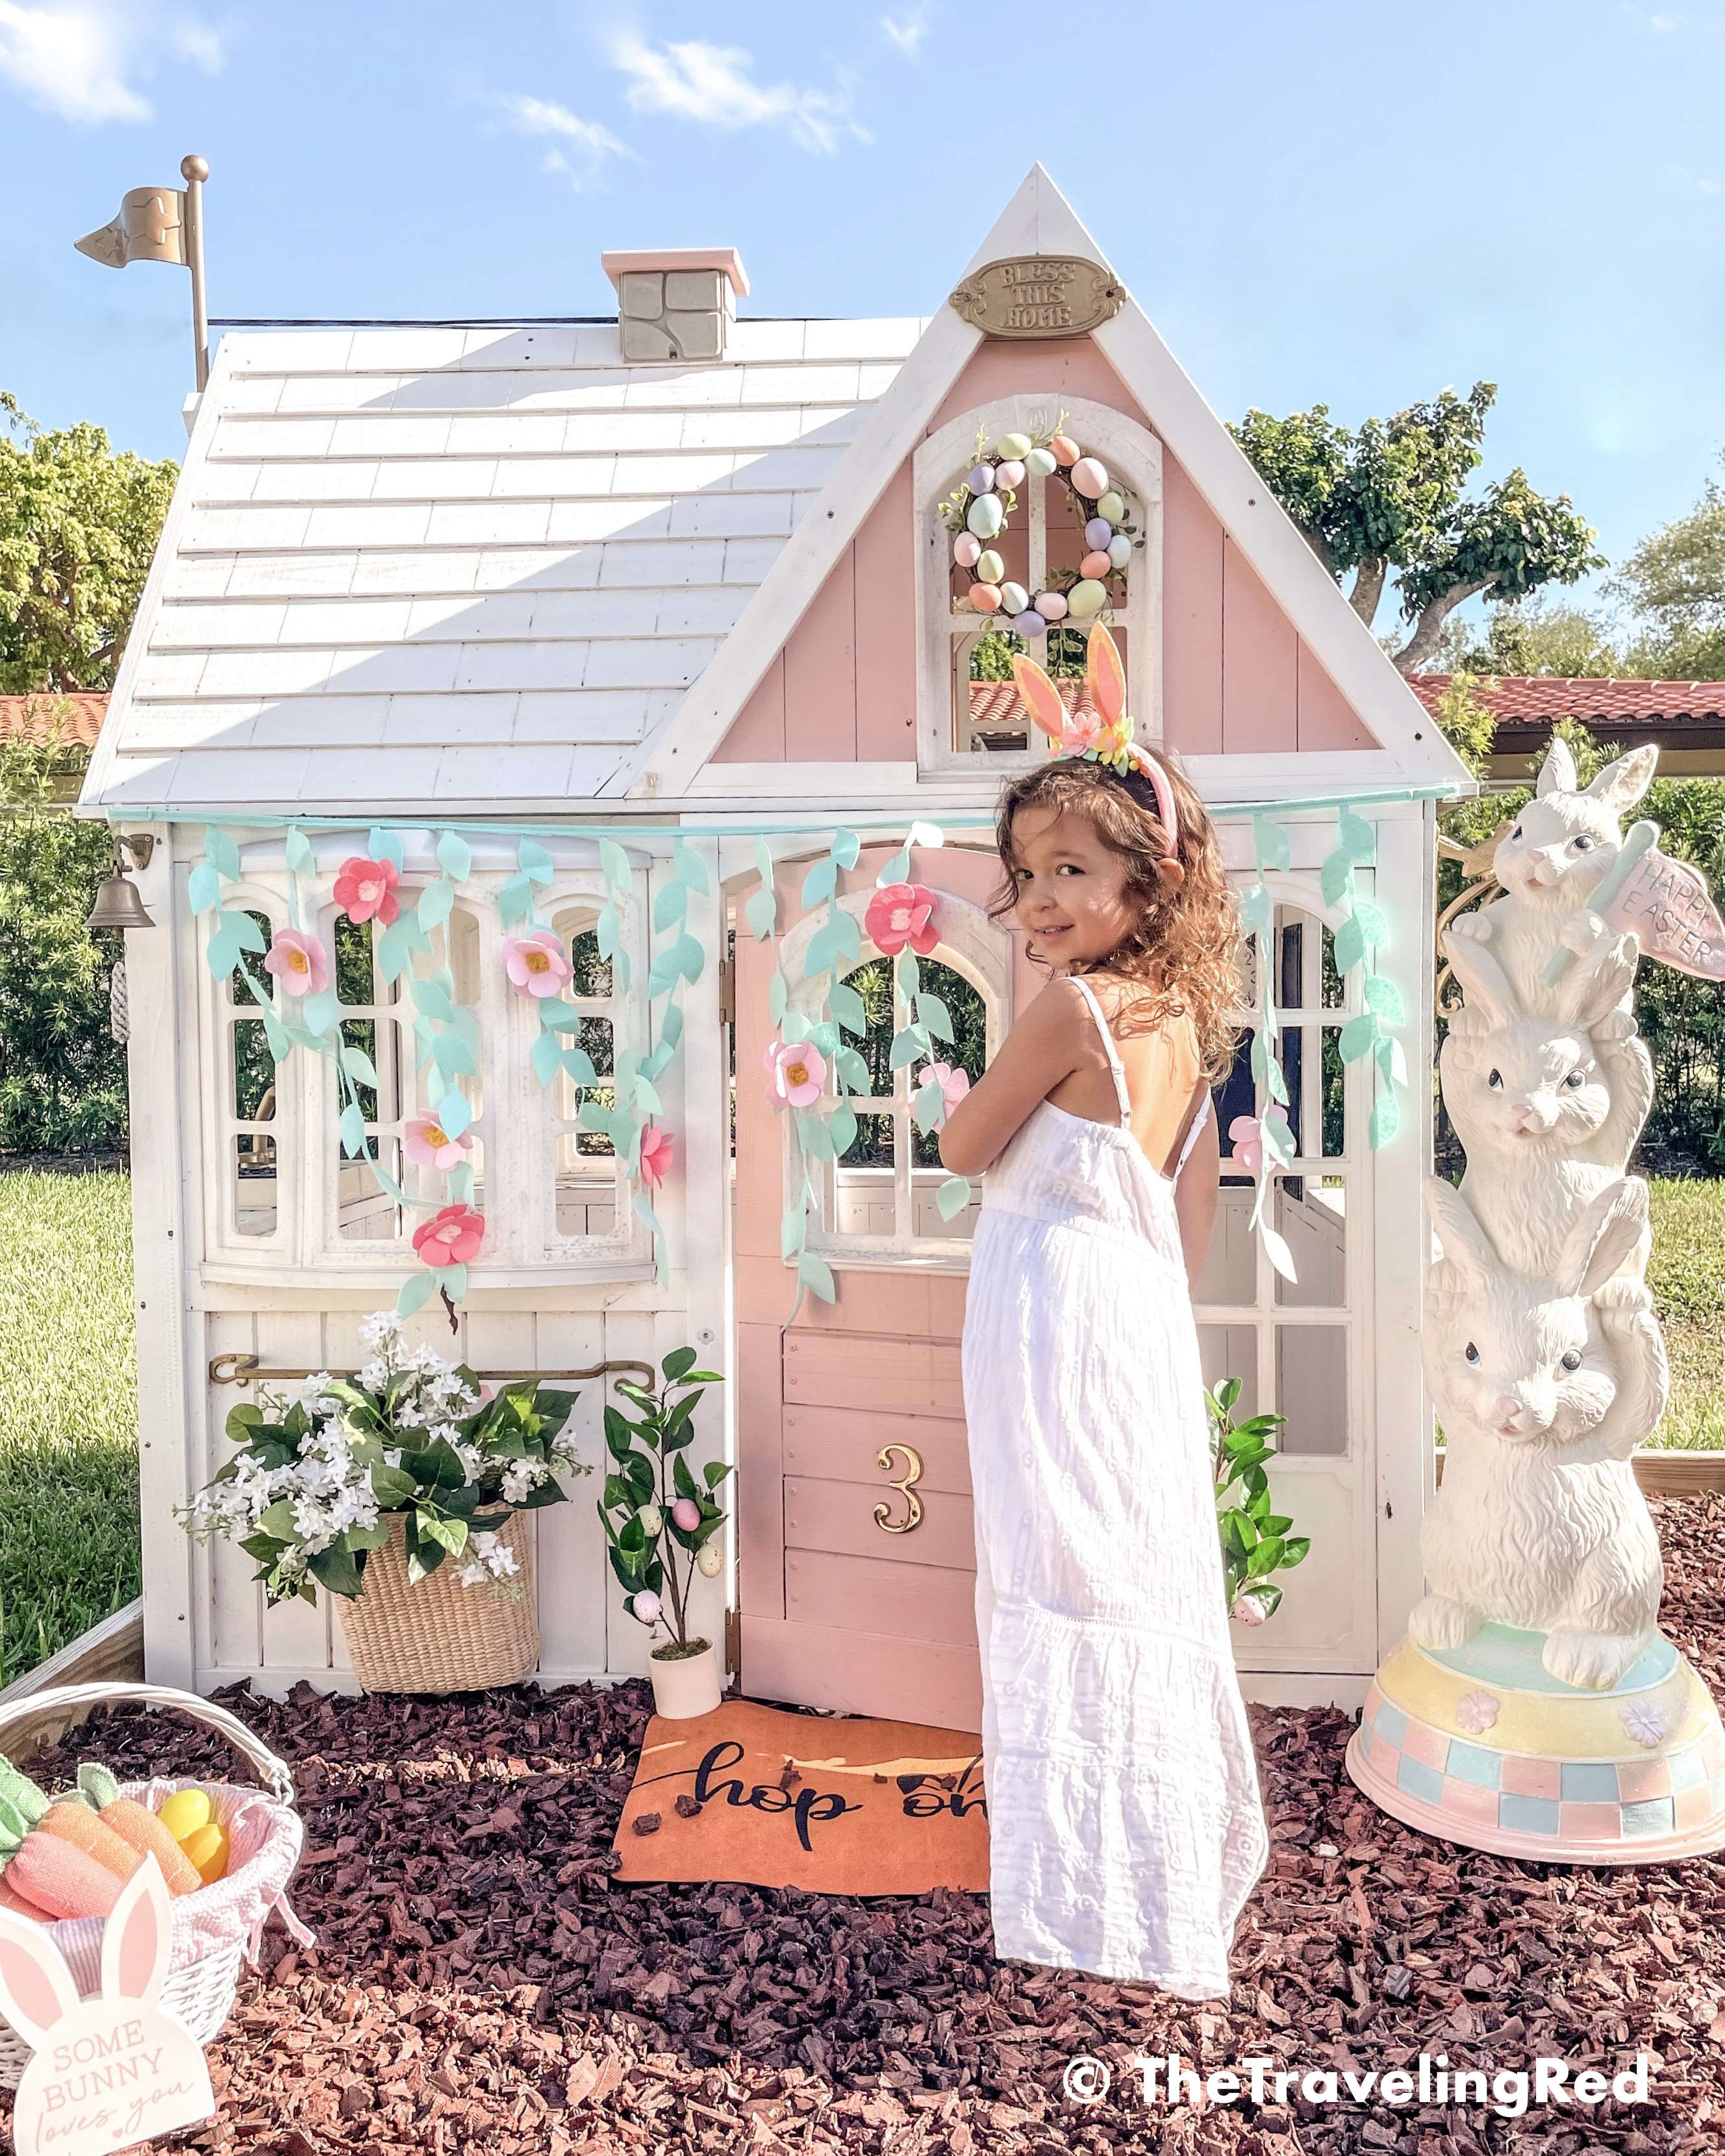 Little girls outdoor playhouse decorated for easter and spring. My daughters outdoor pink and white playhouse that my husband DIY ed for her custom backyard playground. It's the perfect backdrop for any photo shoot. I do seasonal photo shoots for each holiday in front of her house and decorate for the holiday.